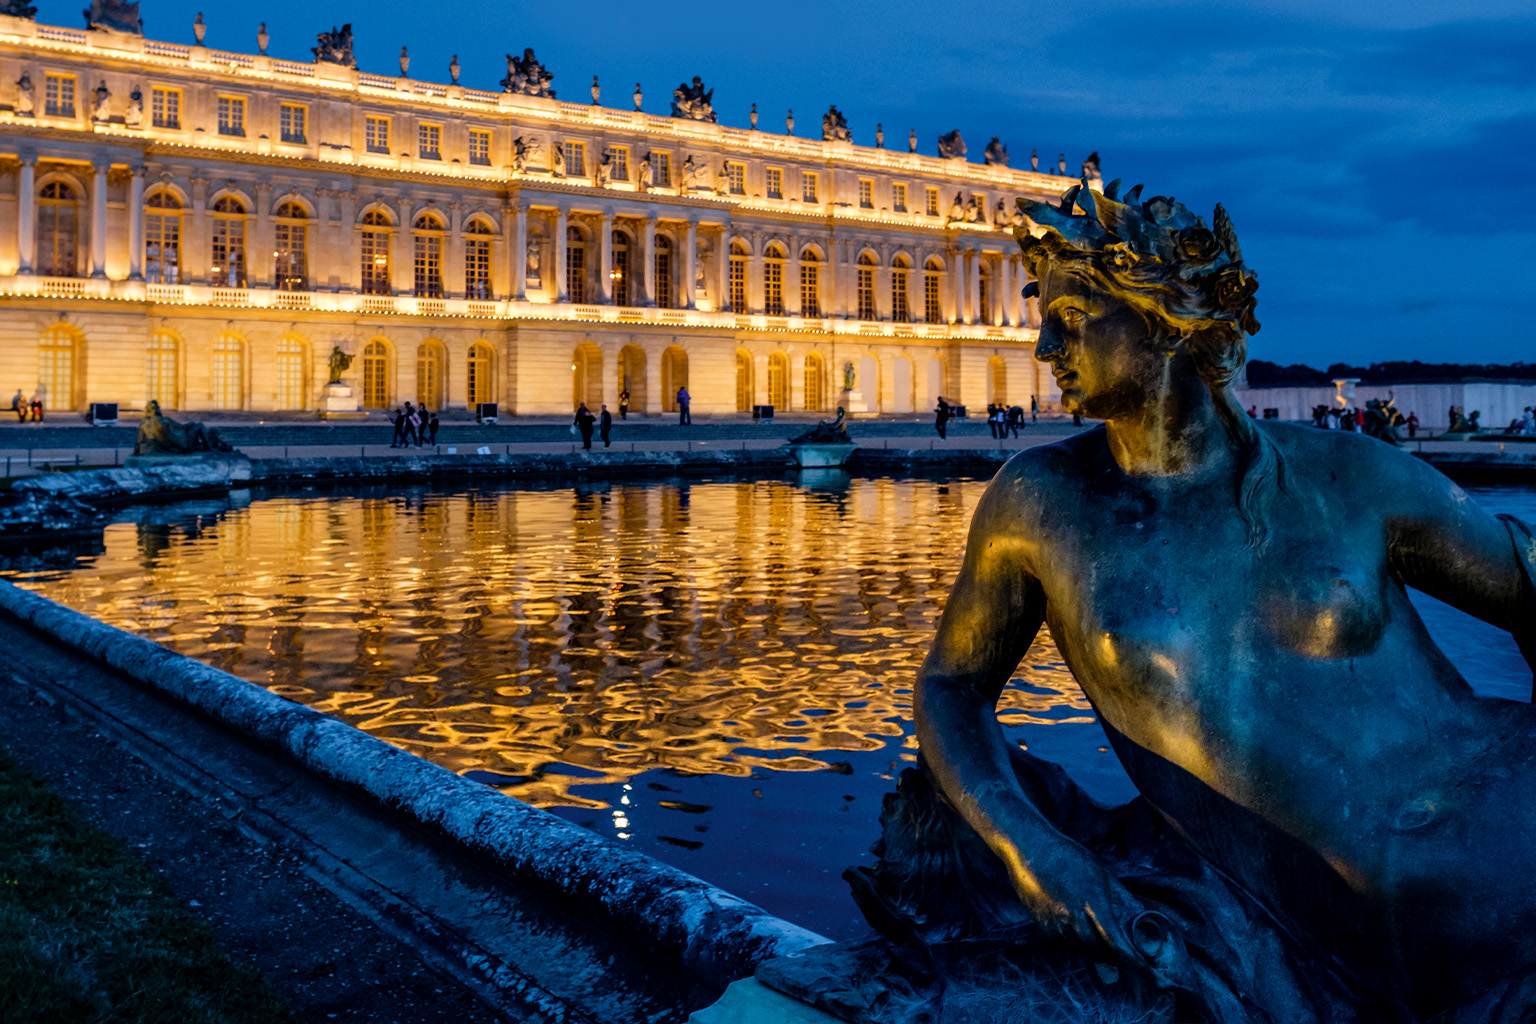 The Night Fountains Show at the Palace of Versailles: firewords at the palace of versailles, Chateau de versailles, in the gardens with fountains. © Nicolas Chavance